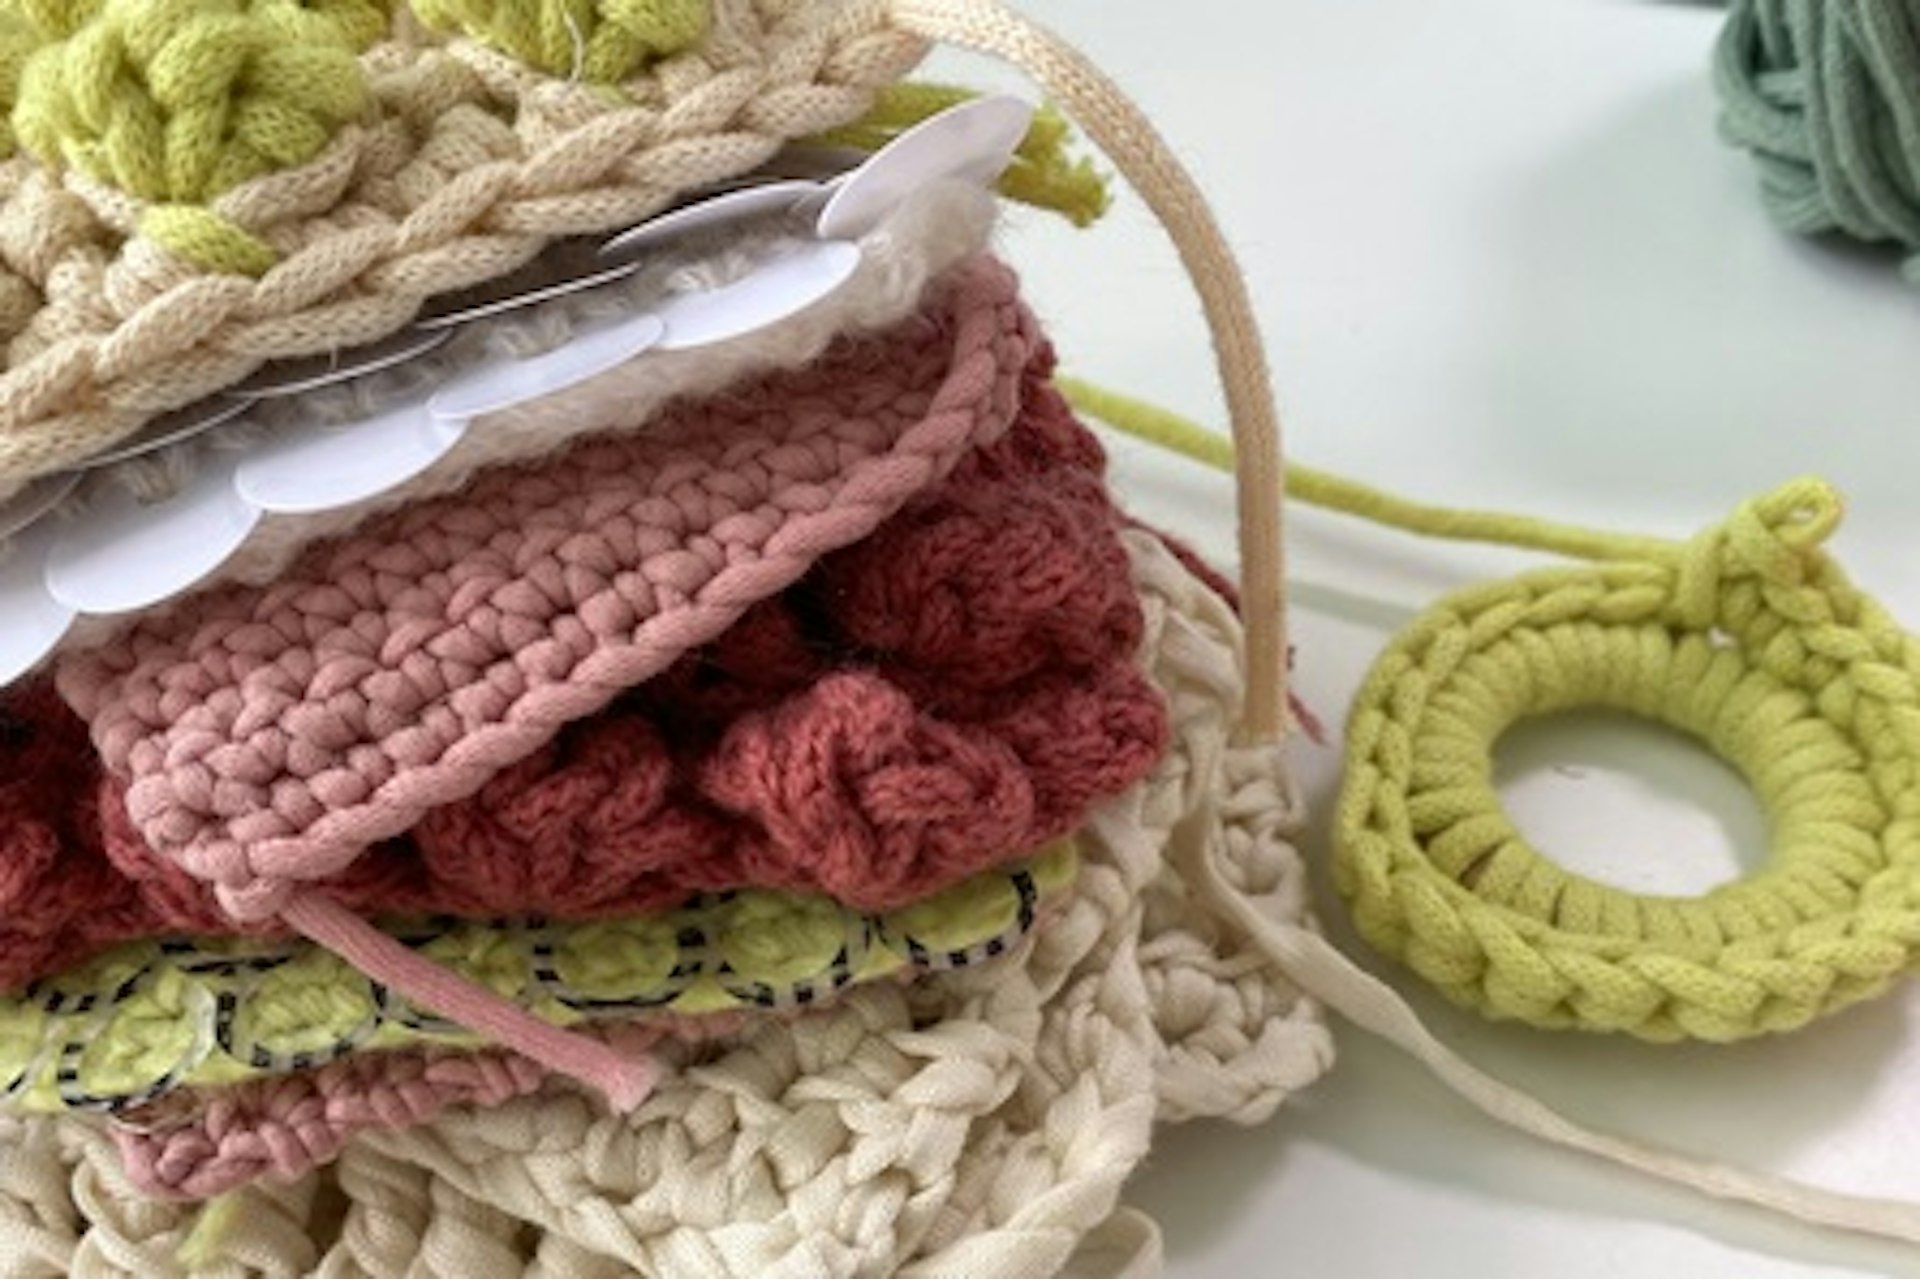 At Home Crochet Masterclass Kit with Online Tutorial Videos 4